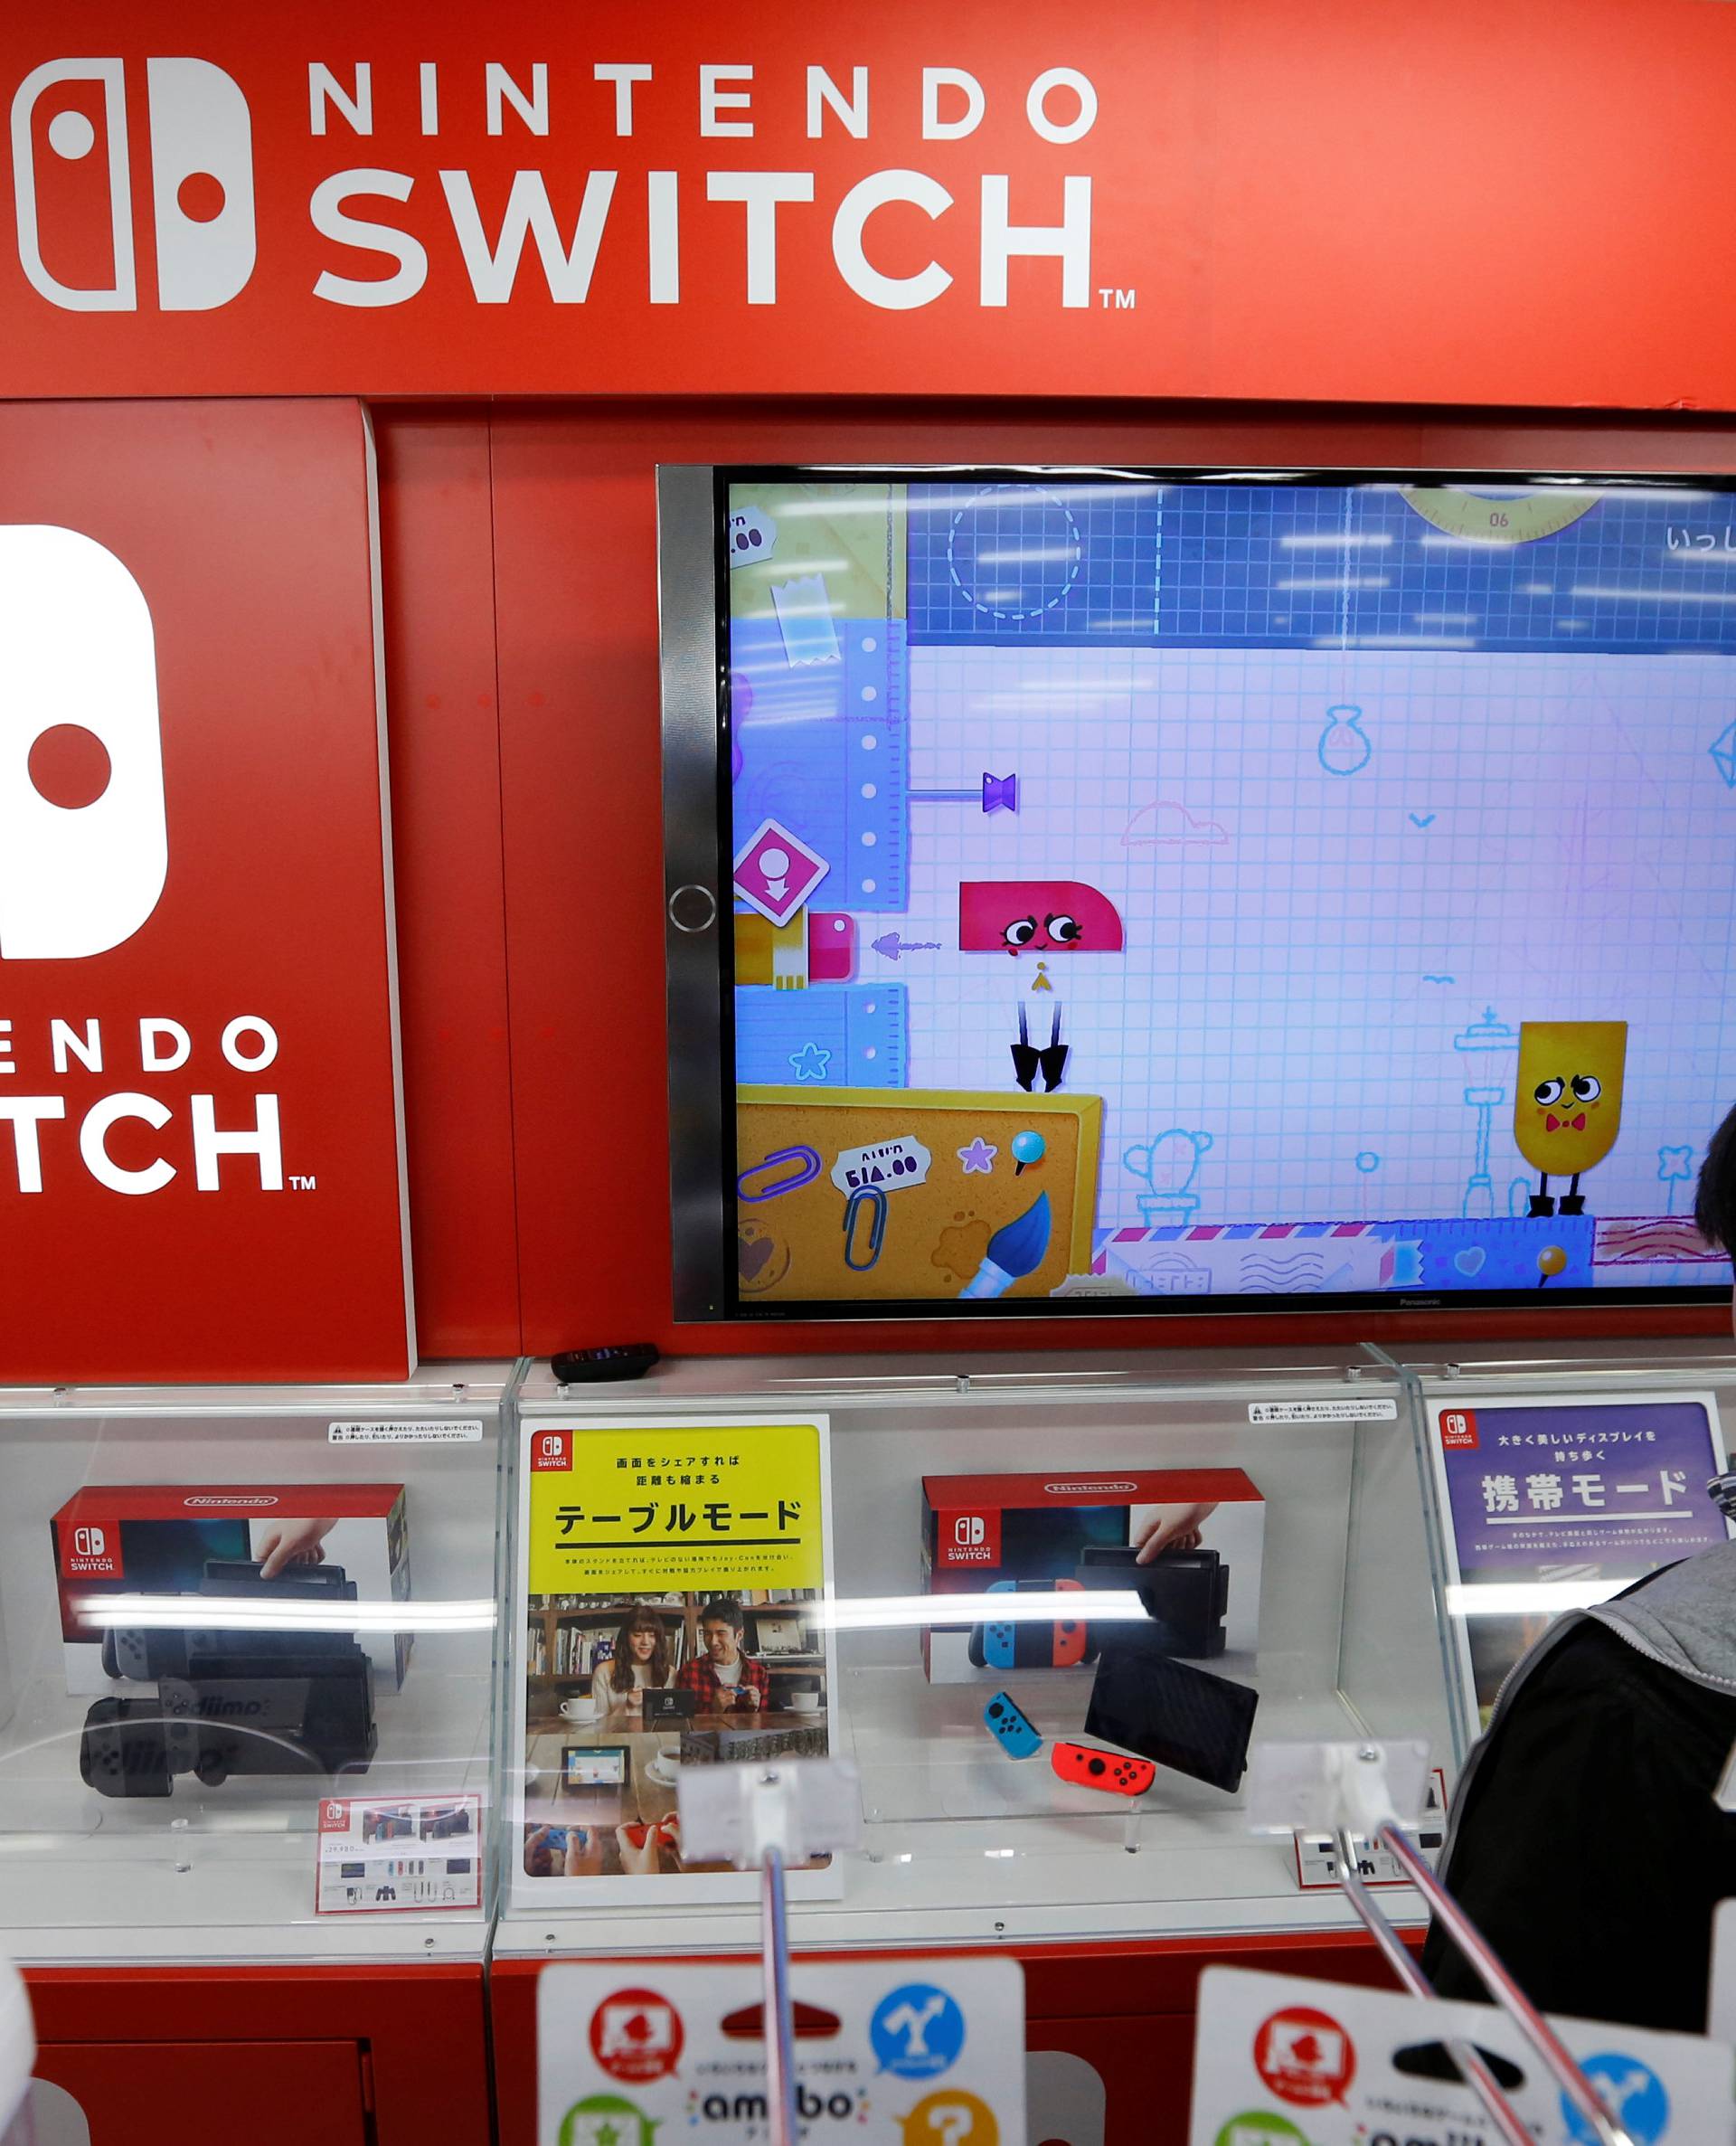 Logos of Nintendo Switch game console are seen at an electronics store in Tokyo